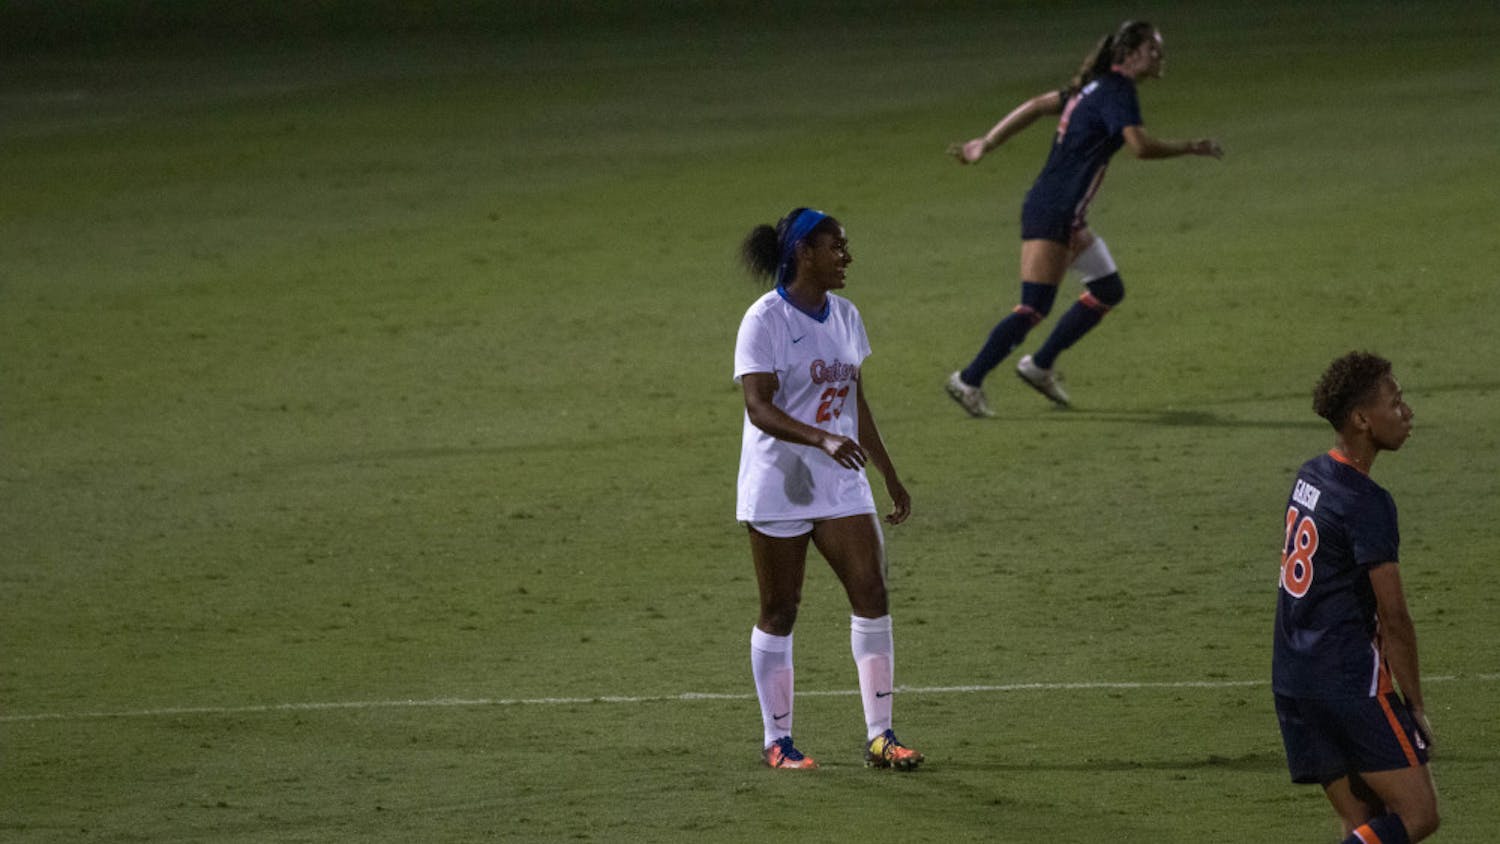 Florida's Kouri Peace, pictured in 2019, played on her birthday Sunday and saw two chances at a goal, but Miami held on for a 1-0 overtime victory at the buzzer.